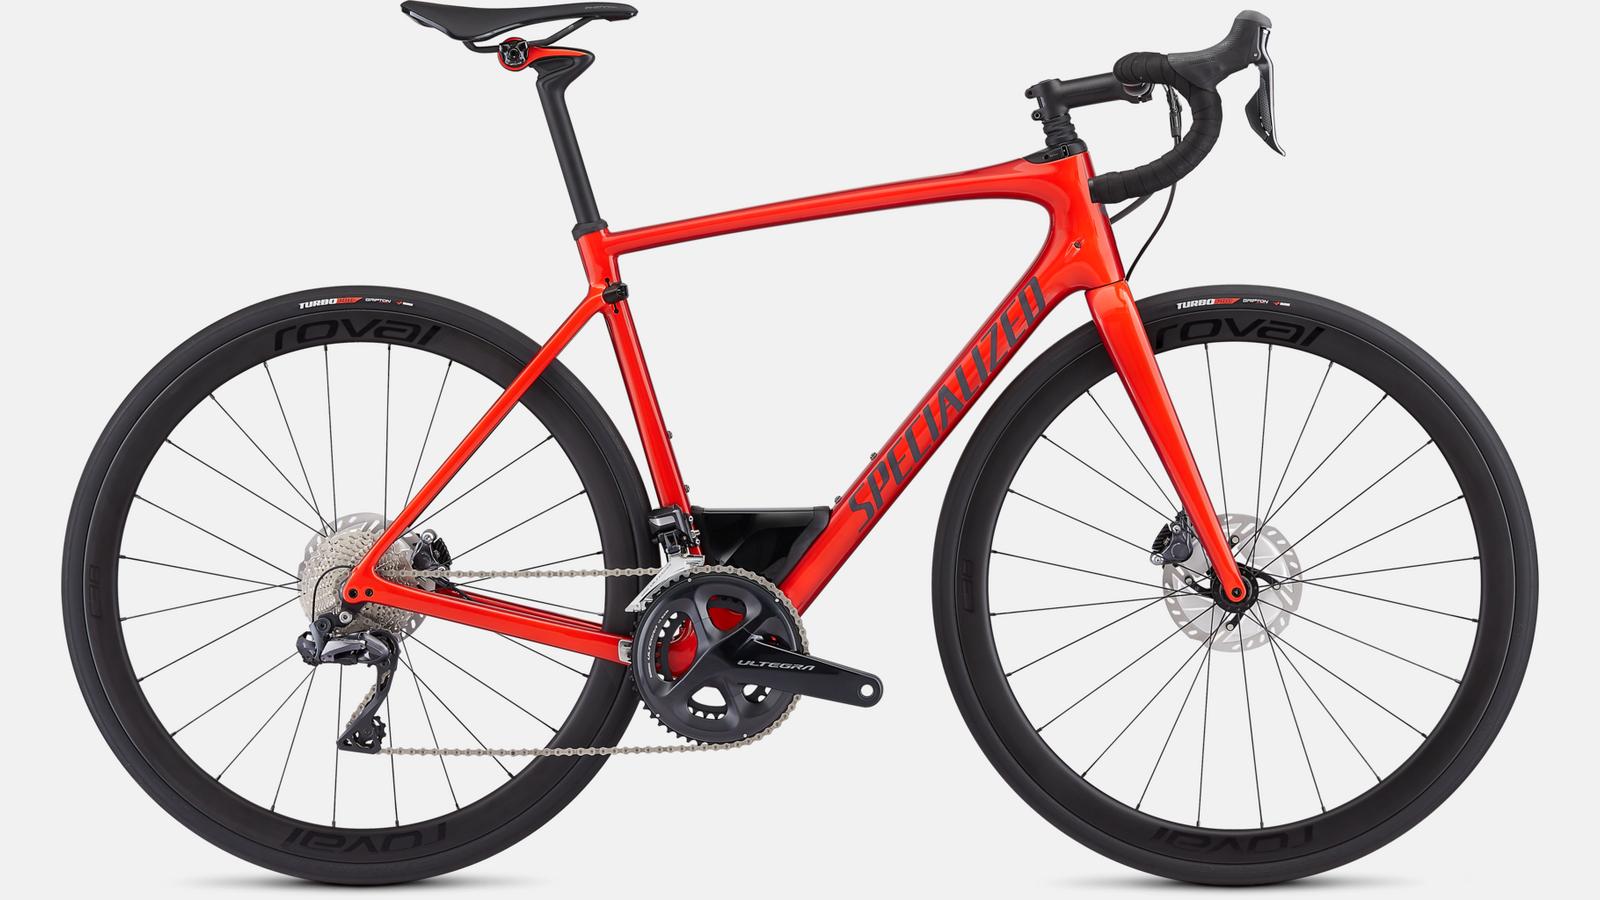 Paint for 2019 Specialized Roubaix Expert - Gloss Rocket Red